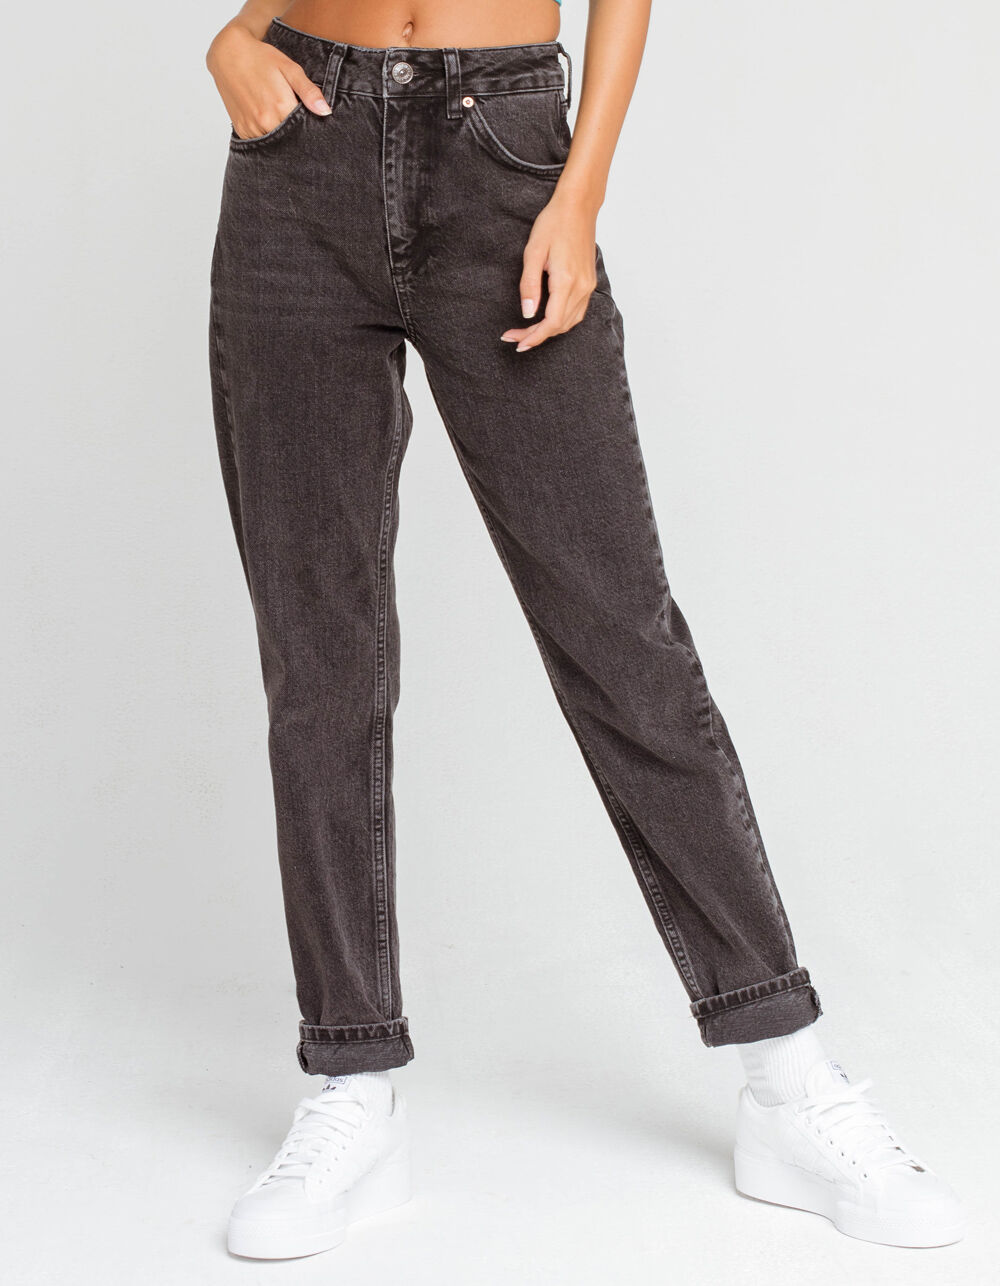 BDG Urban Outfitters Womens Black Mom Jeans - WASH BLACK | Tillys